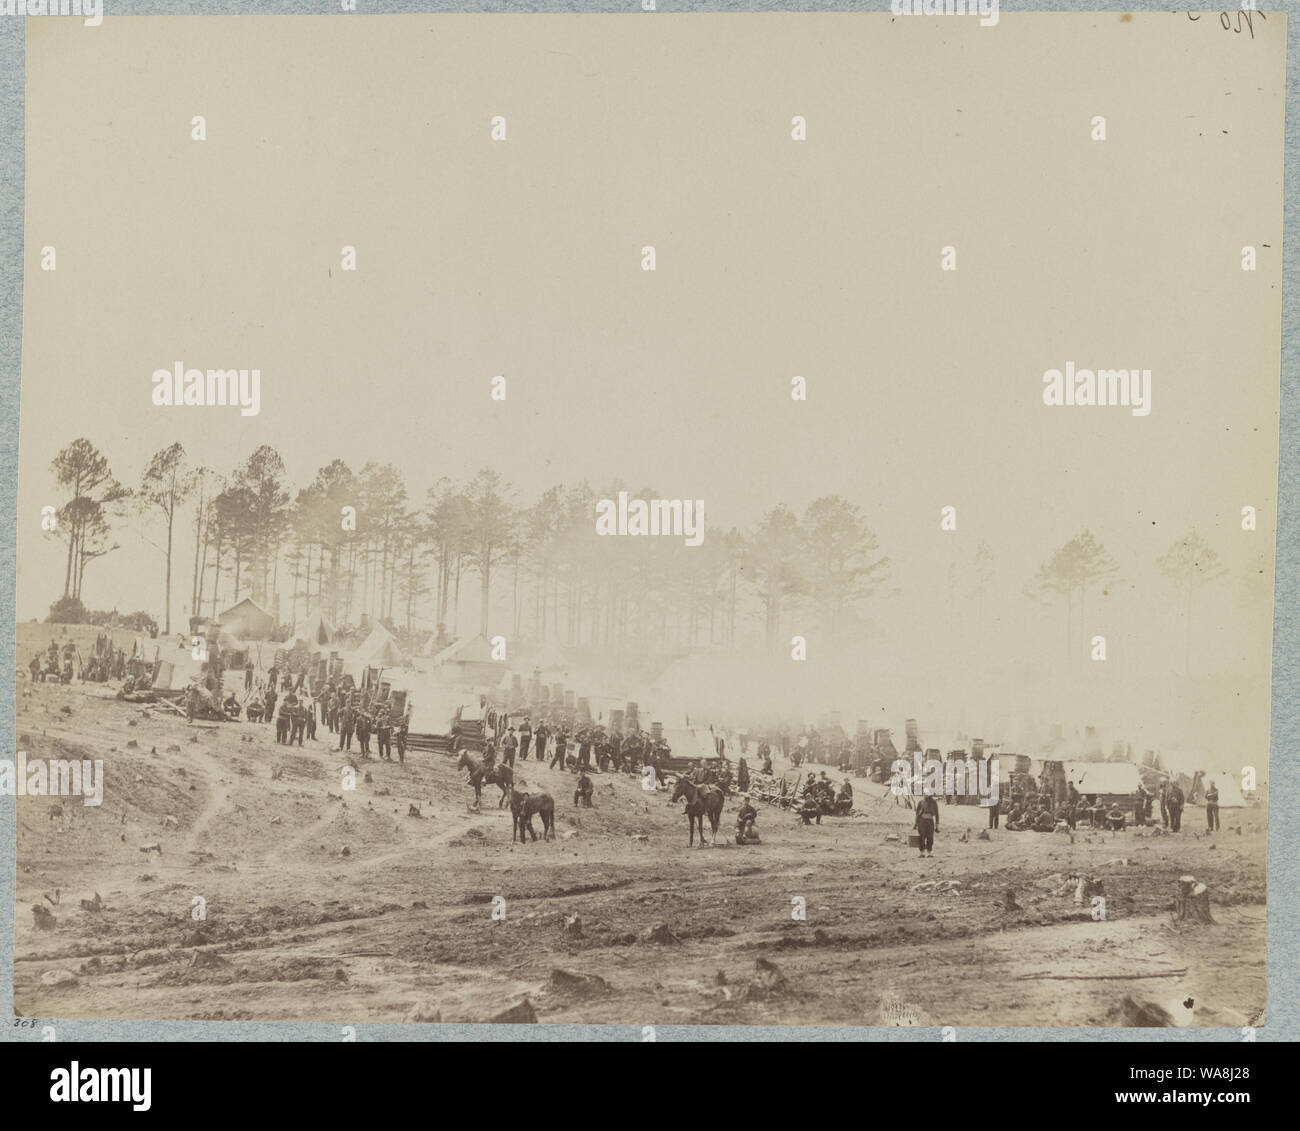 Camp of the 114th Pennsylvania Infantry, Brandy Station, Va., March, 1864 Stock Photo